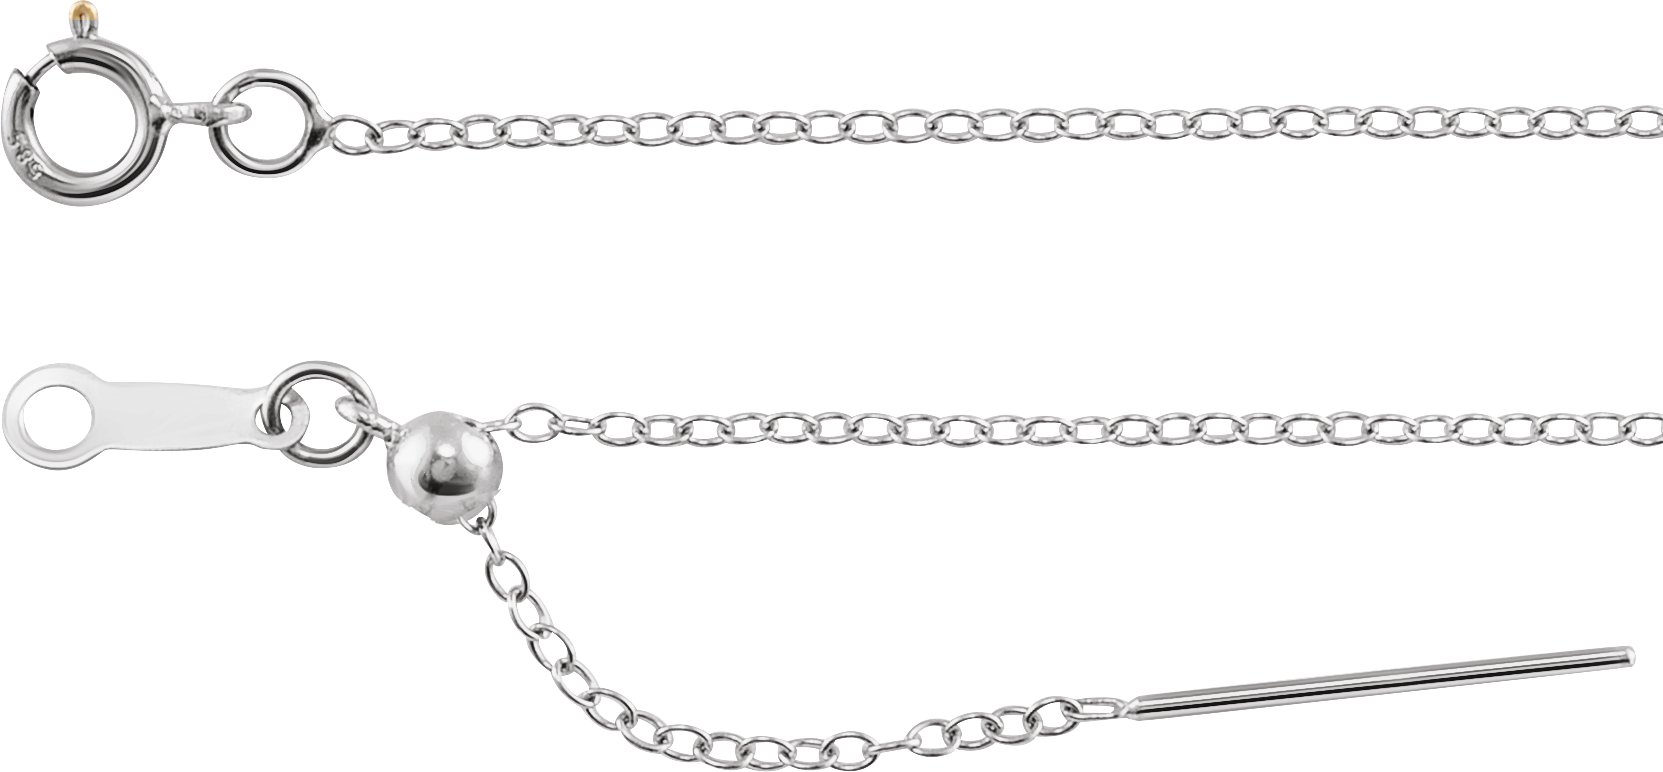 Rhodium-Plated Sterling Silver 1.1 mm Adjustable Threader Cable 6-8" Chain 